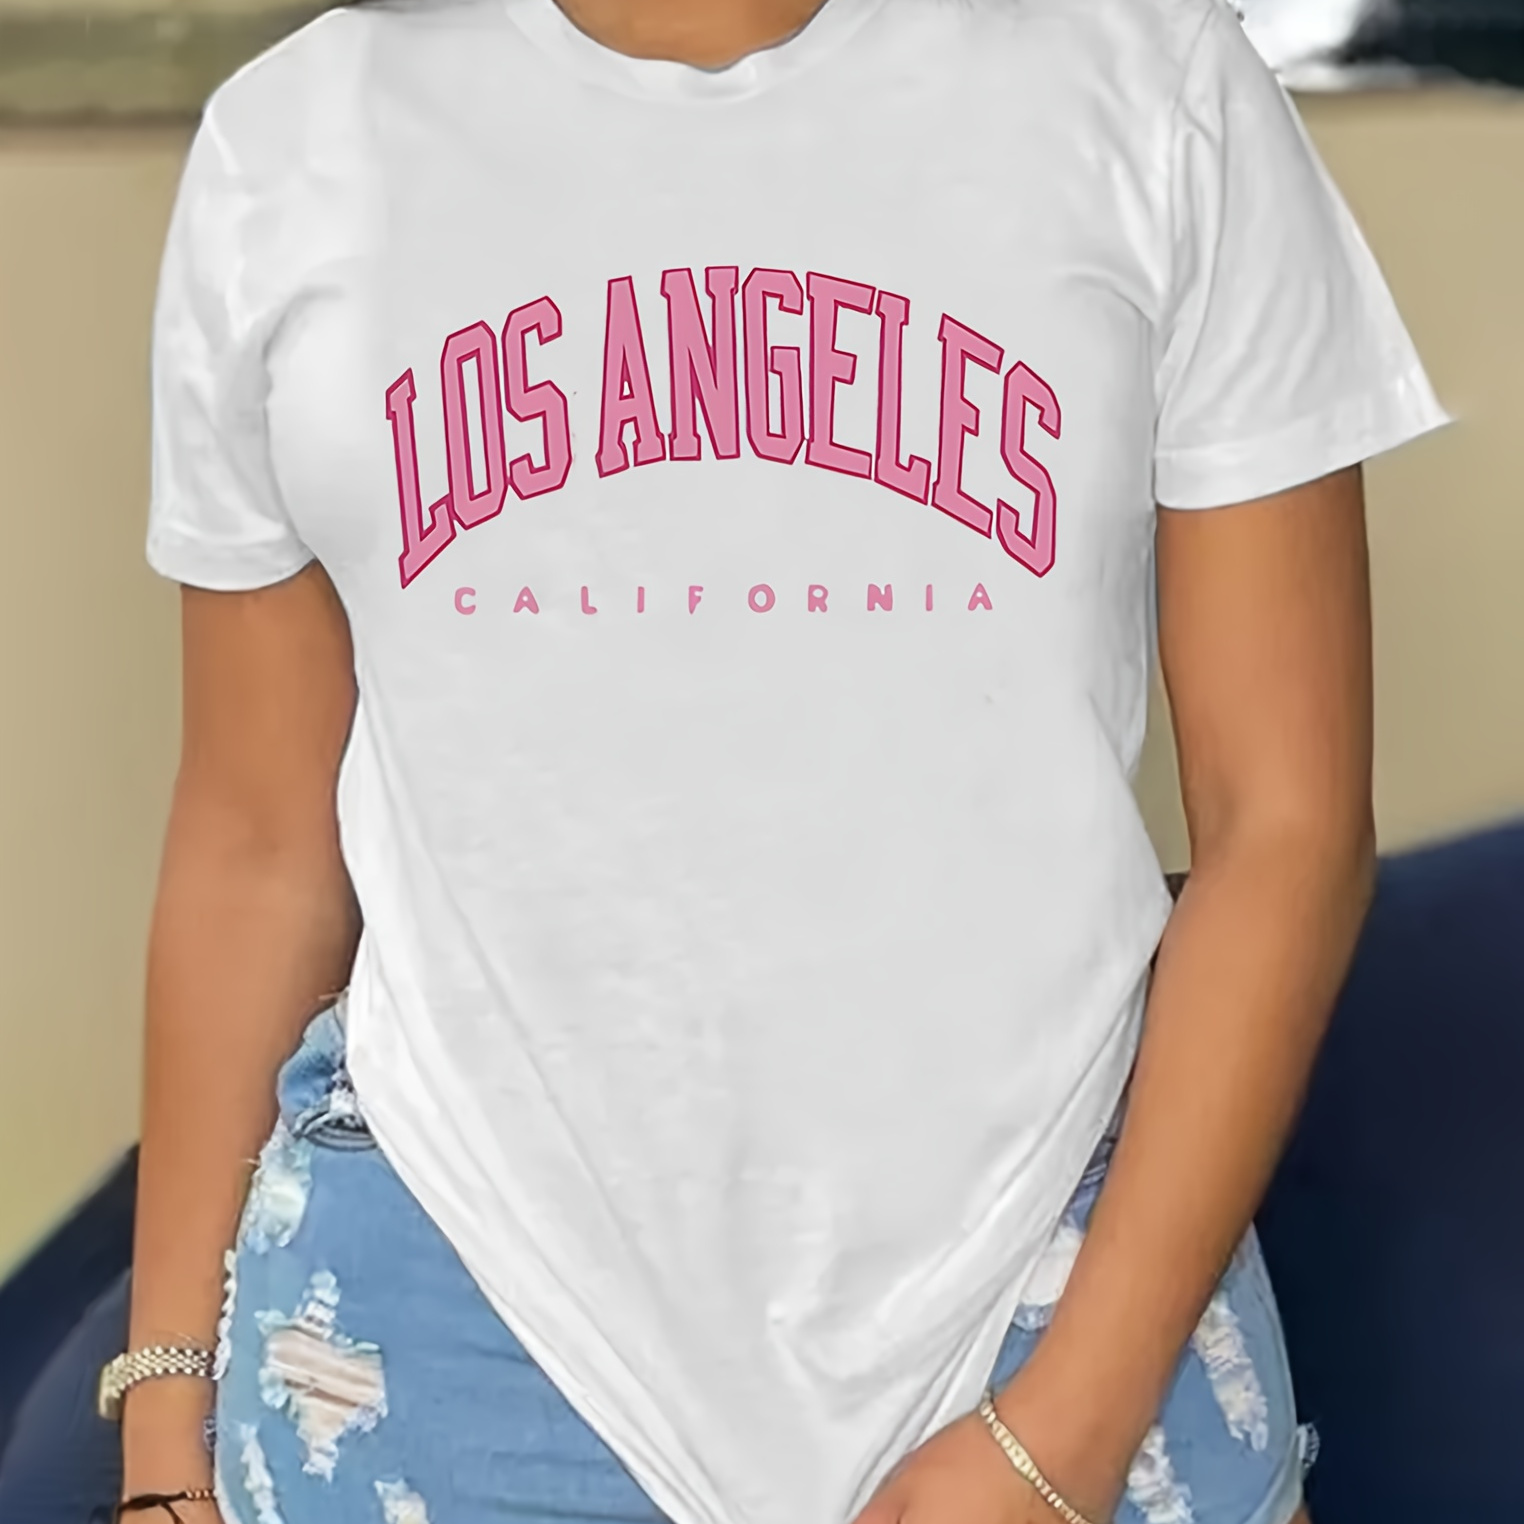 

Los Angeles Letter Print T-shirt, Short Sleeve Crew Neck Casual Top For Summer & Spring, Women's Clothing